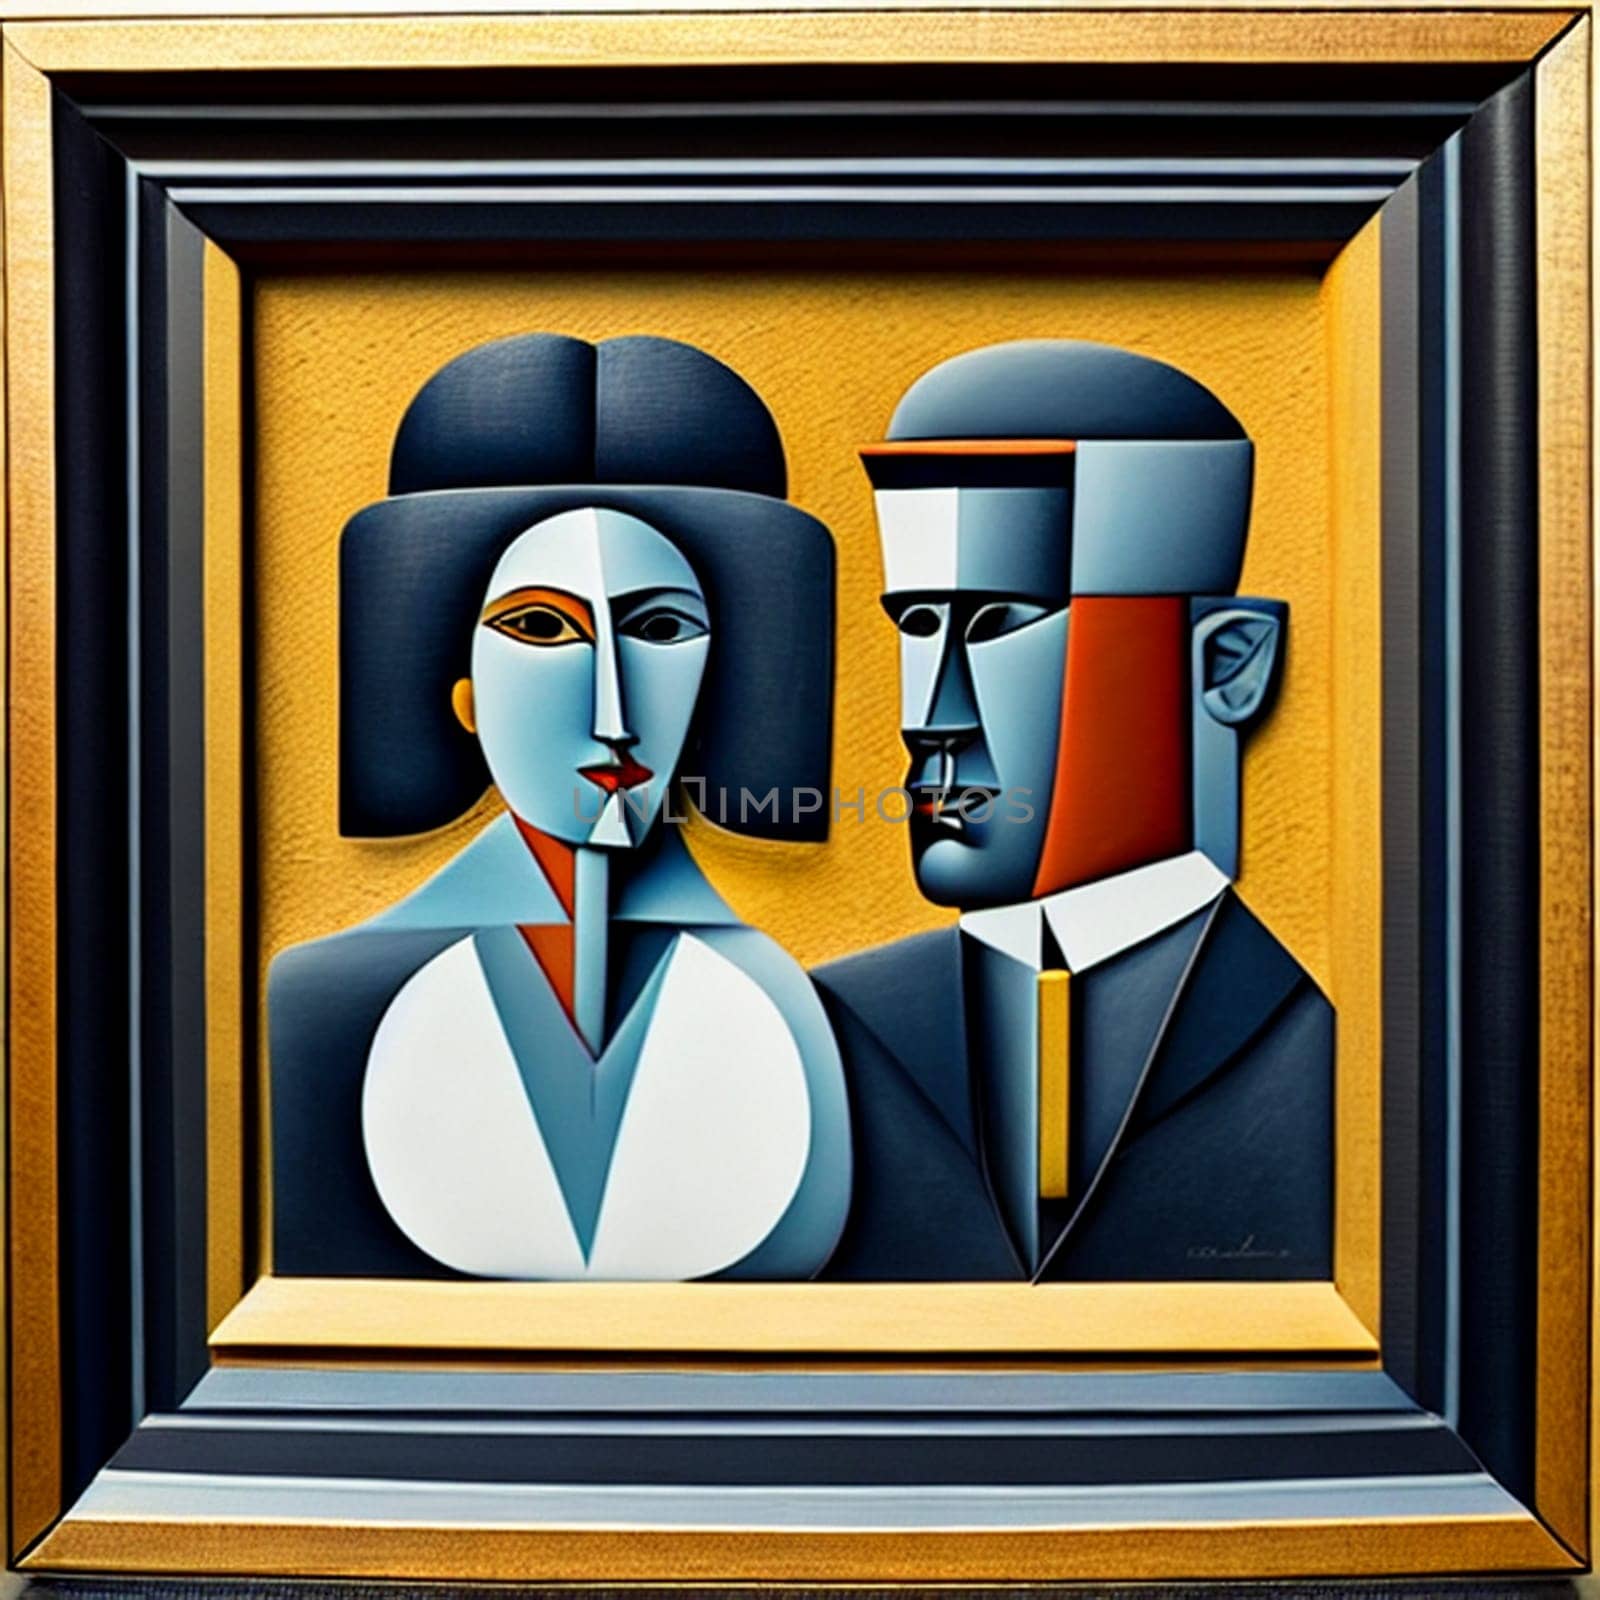 This stunning cubist portrait depicts a man and woman standing side by side, their features reimagined in a mesmerizingly abstract style. The use of AI technology in the creation of this piece adds an exciting element of modernity to an already captivating work of art.